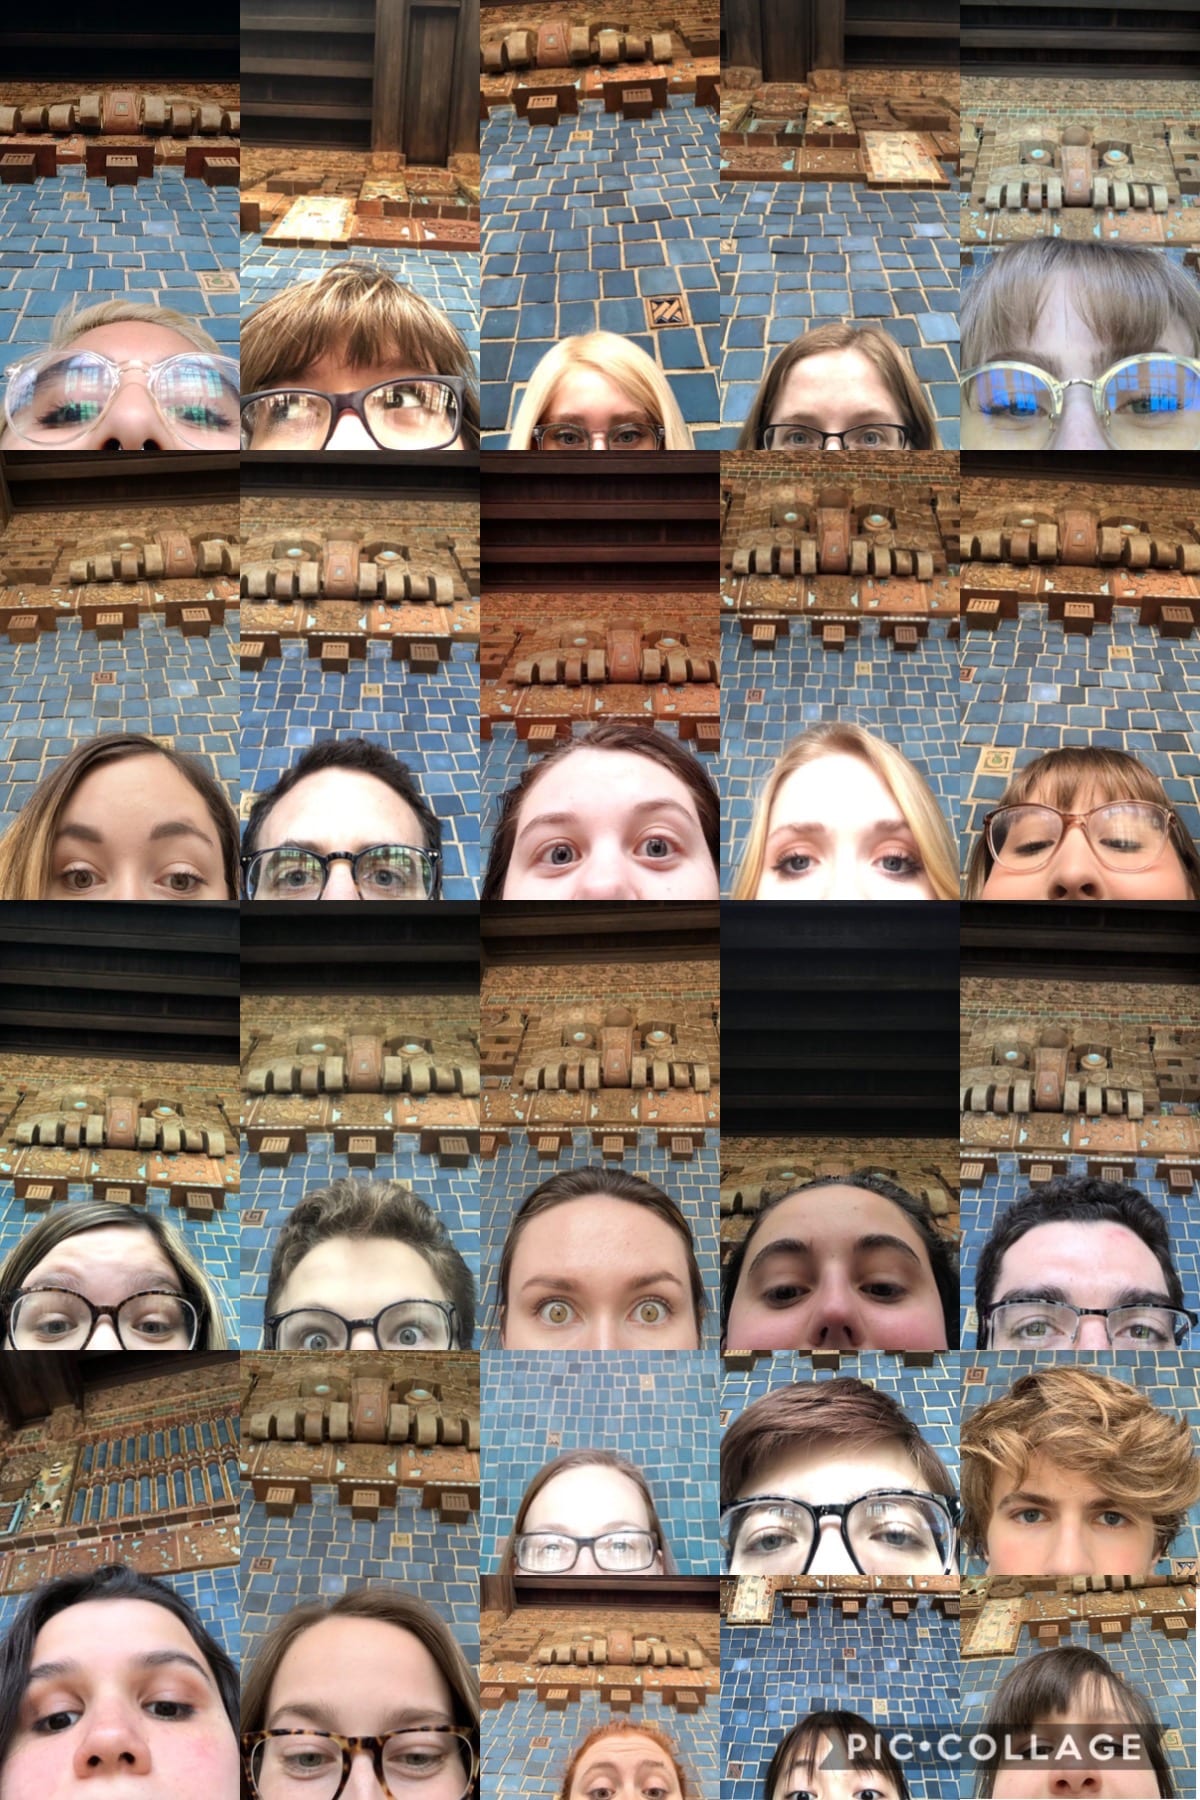 A collage of photos of members of the St. Olaf group in front of a blue tiled wall